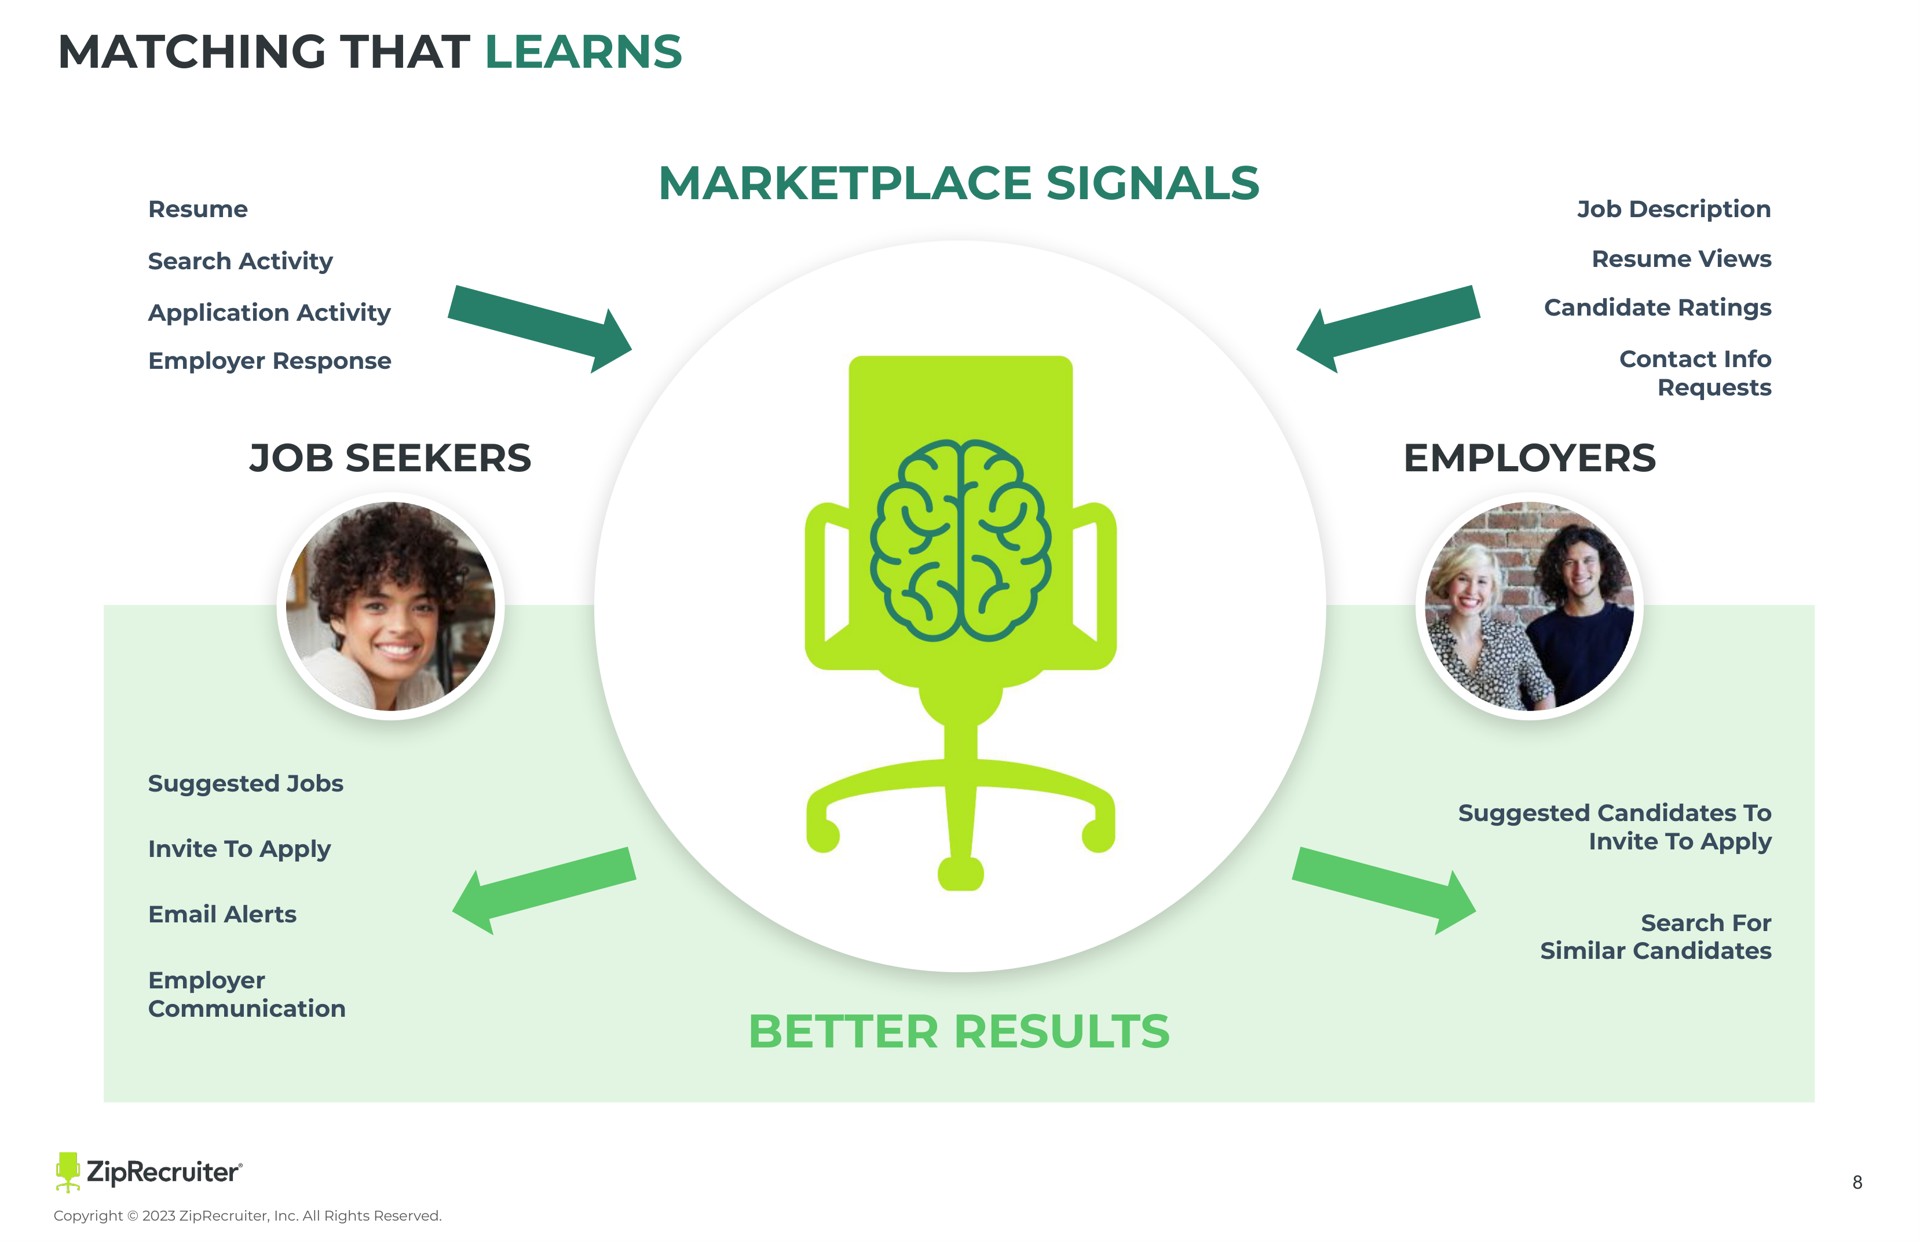 signals job seekers employers better results matching that learns | ZipRecruiter